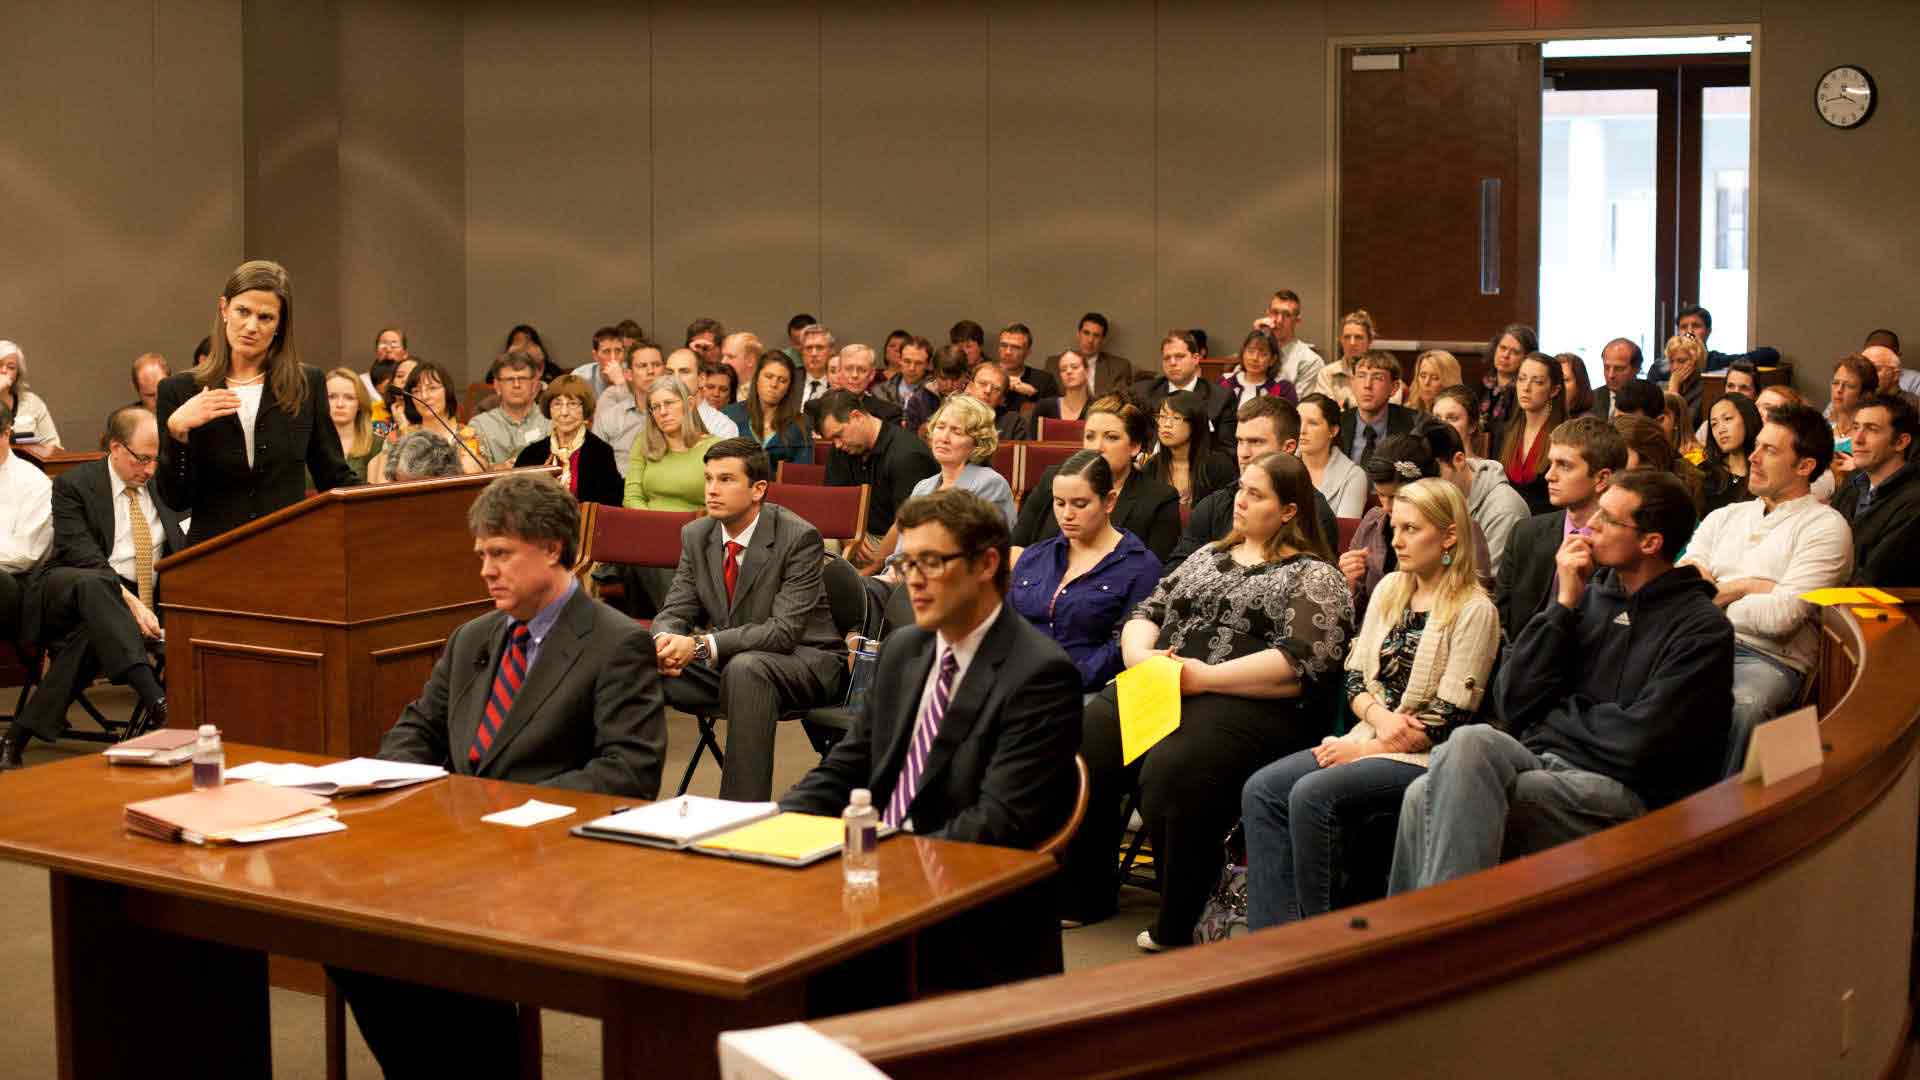 Environmental photo of a group sitting in a courtroom during a mock trial.